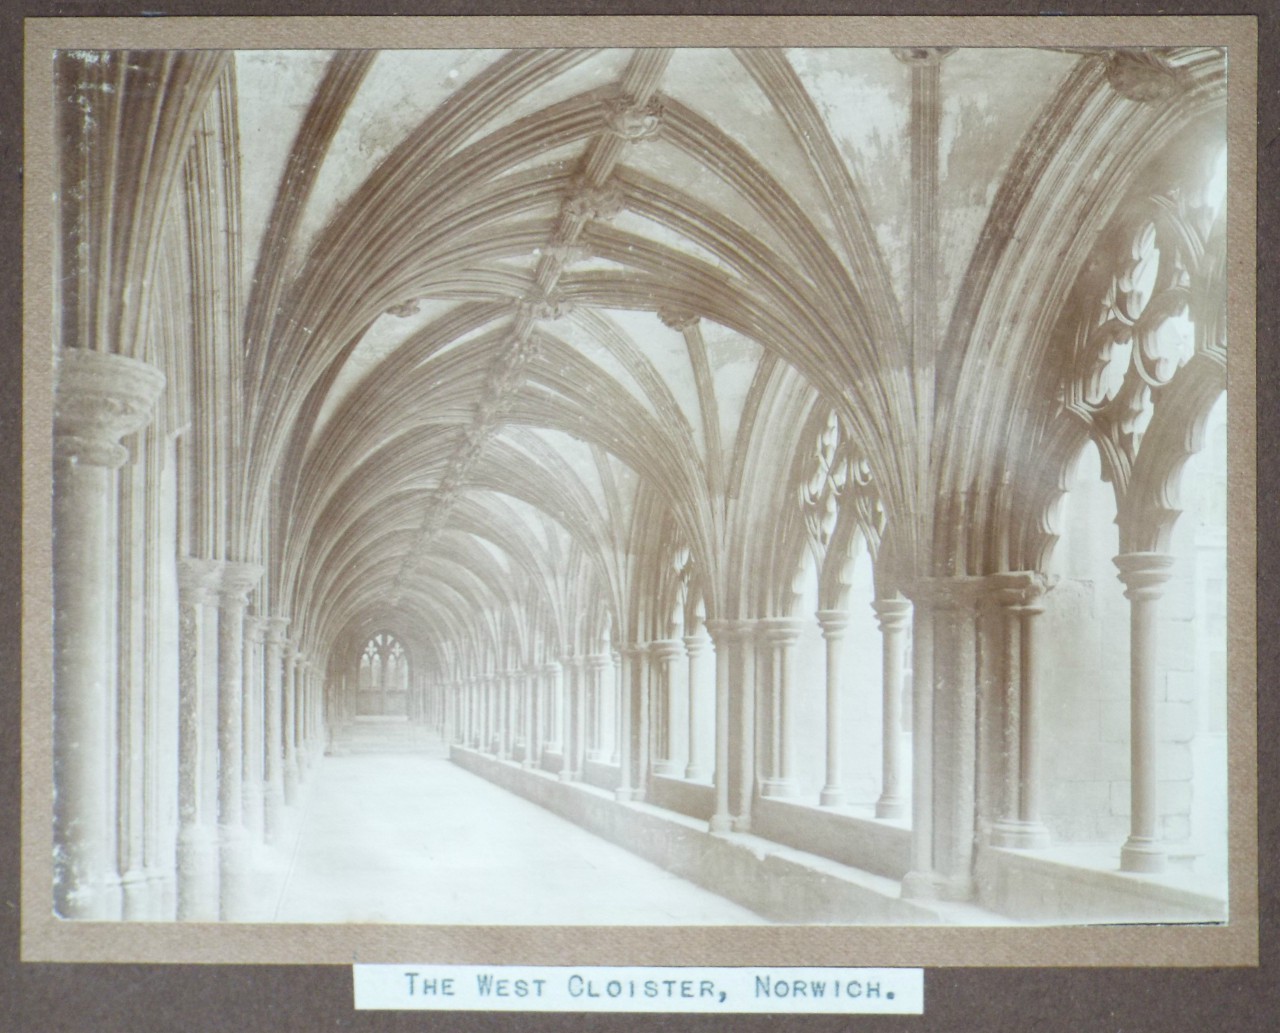 Photograph - The West Cloister, Norwich.